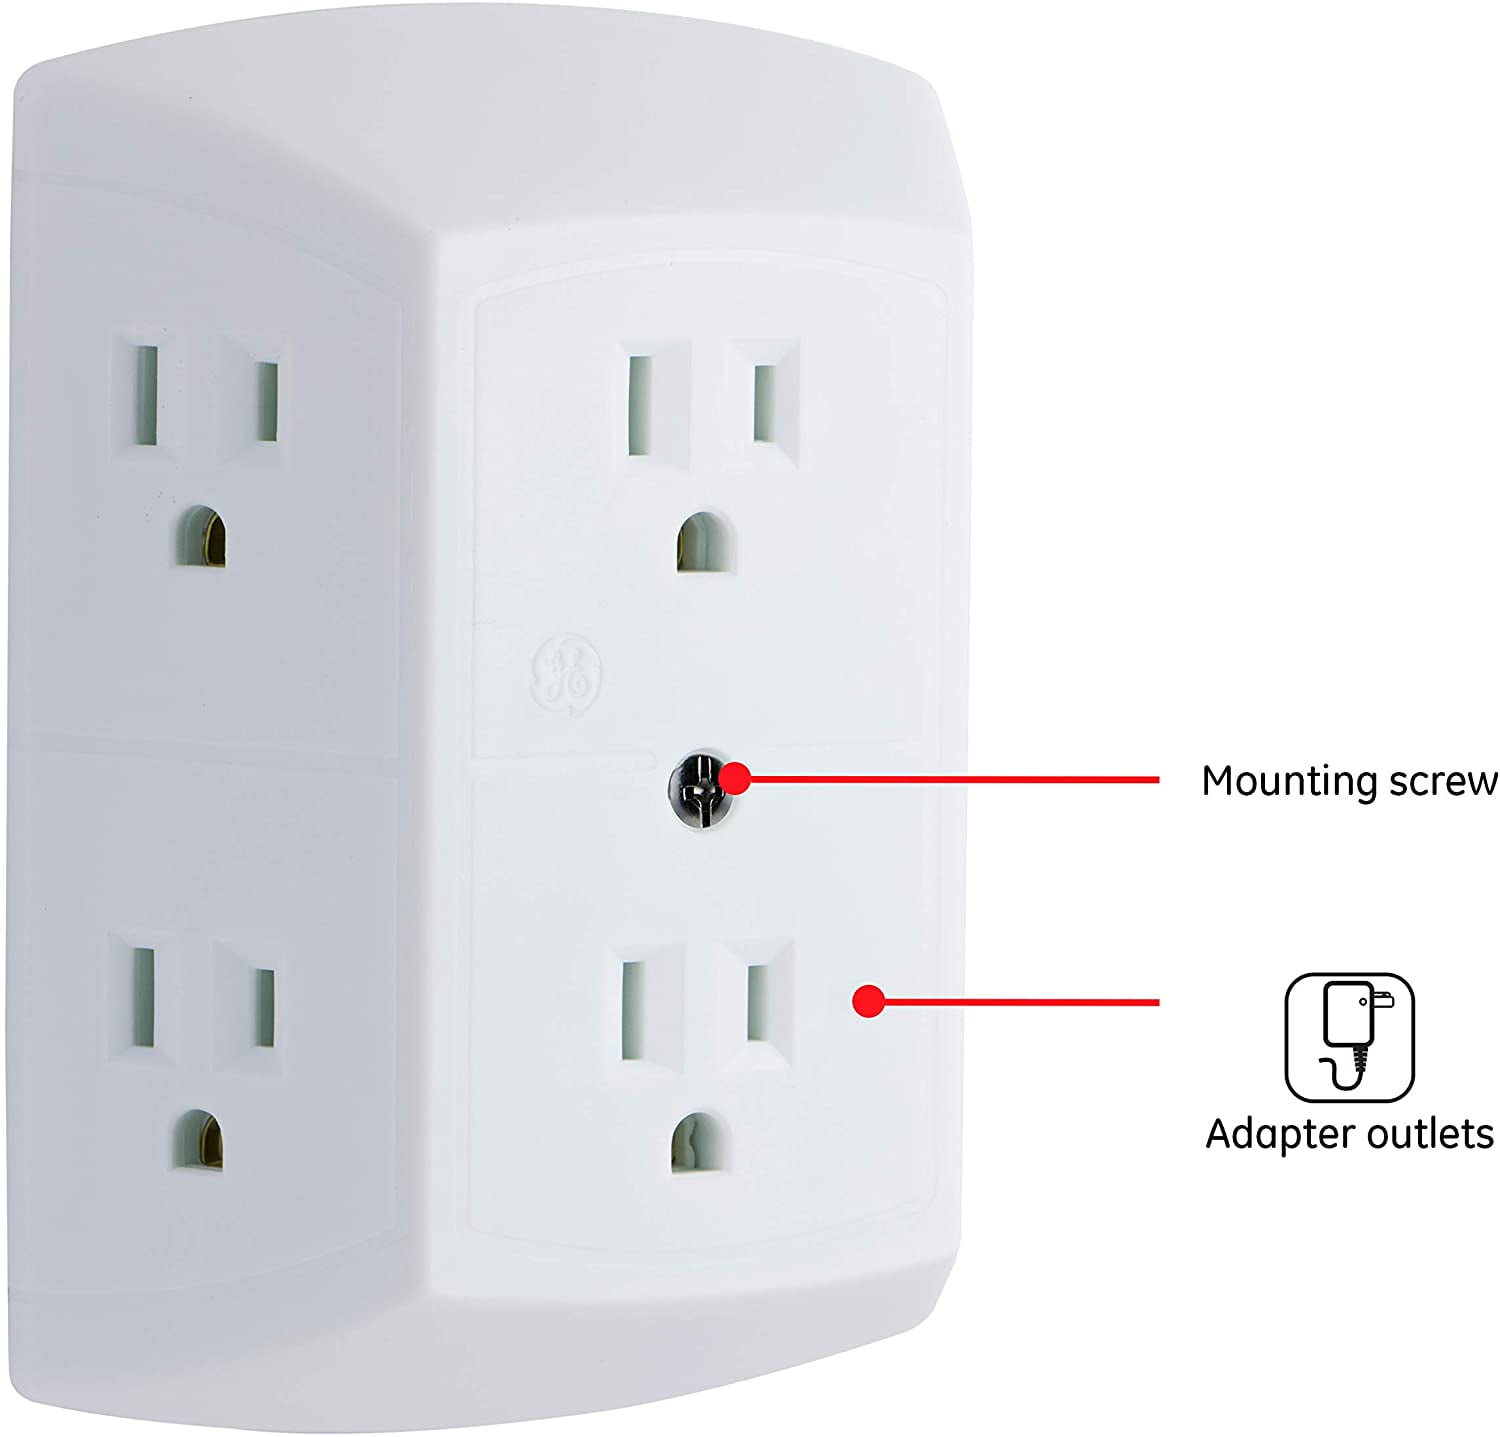 Wall Socket Splitter Divider Electrical Multi Plugs 6 Outlet Adapter Power Plug 